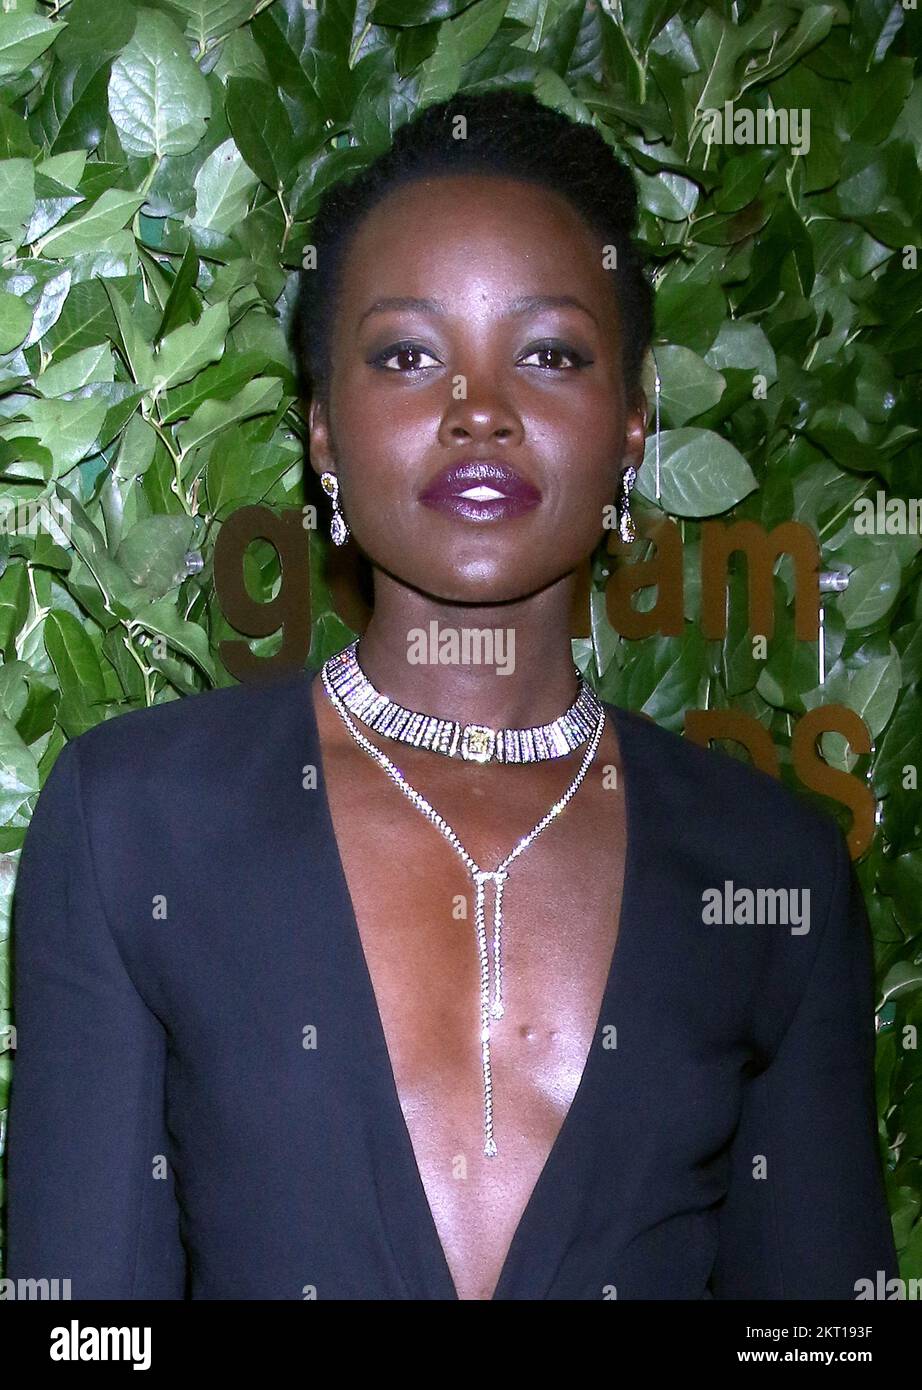 New York, NY, USA. 28th Nov, 2022. Lupita Nyong'o at the 2022 Gotham Awards presented by The Gotham Film & Media Institute at Cipriani Wall Street on November 28, 2022 in New York City. Credit: Rw/Media Punch/Alamy Live News Stock Photo